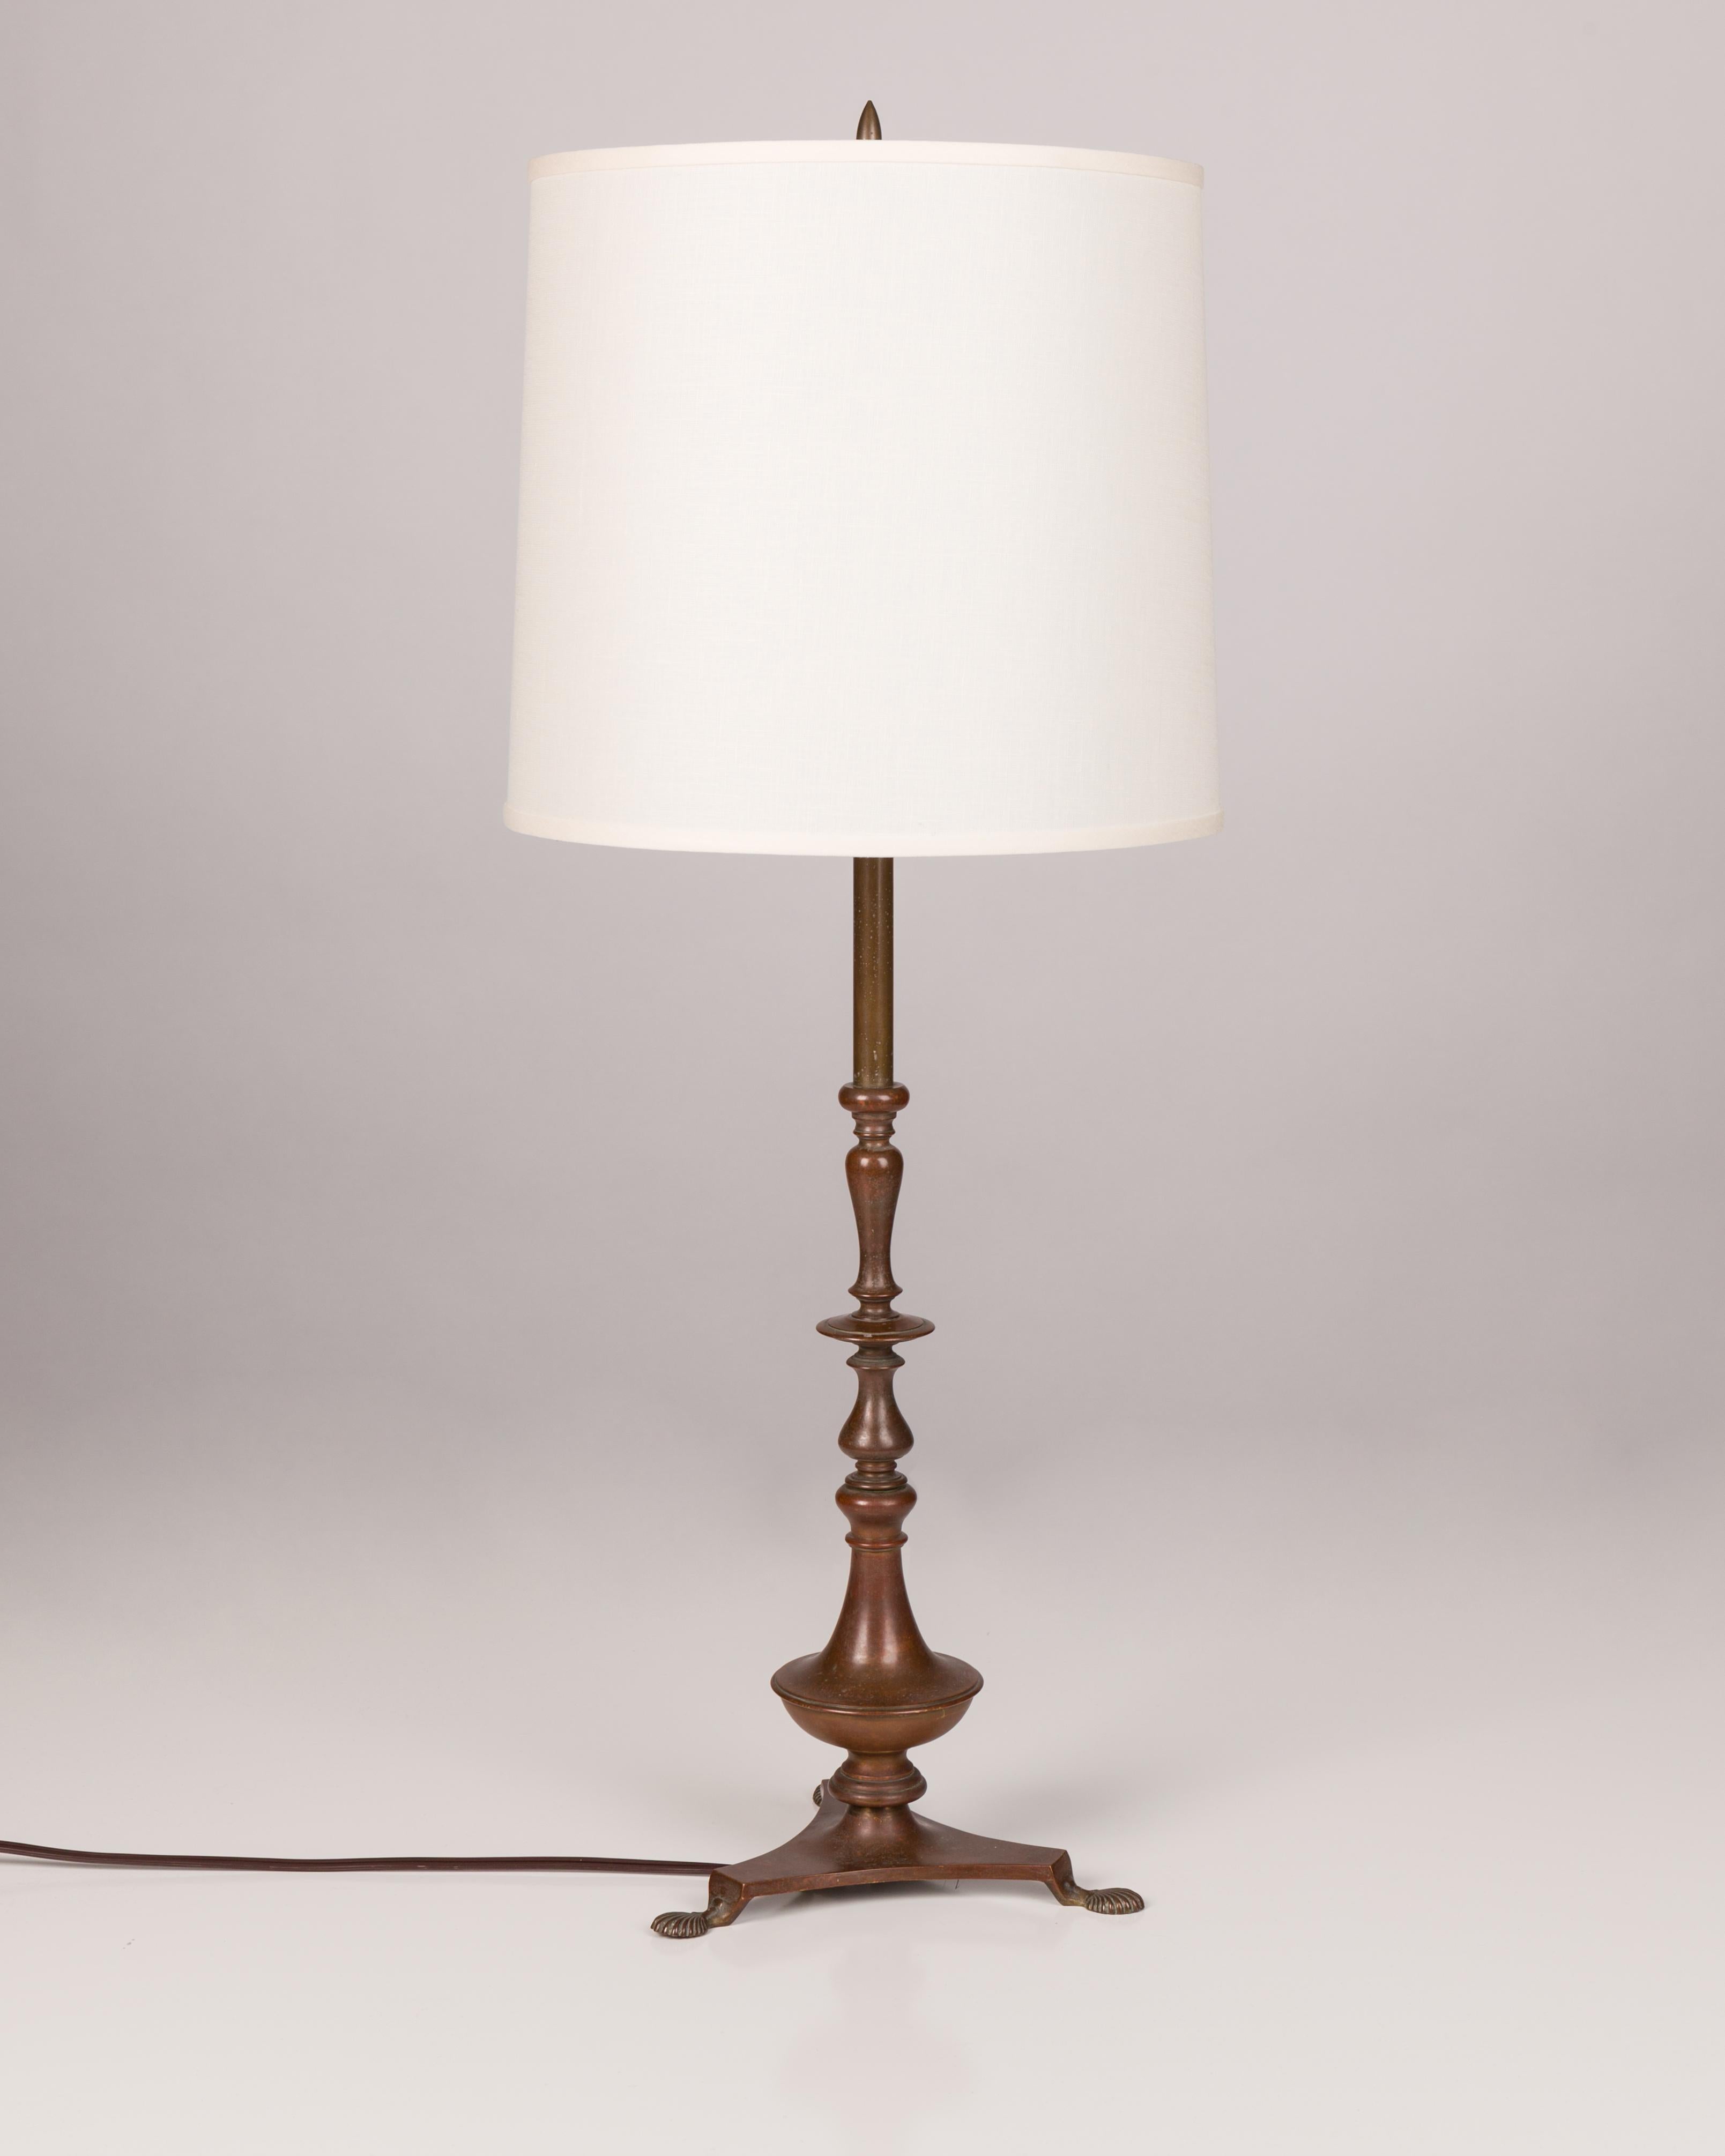 ATL1851
A baroque turned brass table lamp with a tripod base in its original aged bronze patina. Circa 1900. The 12